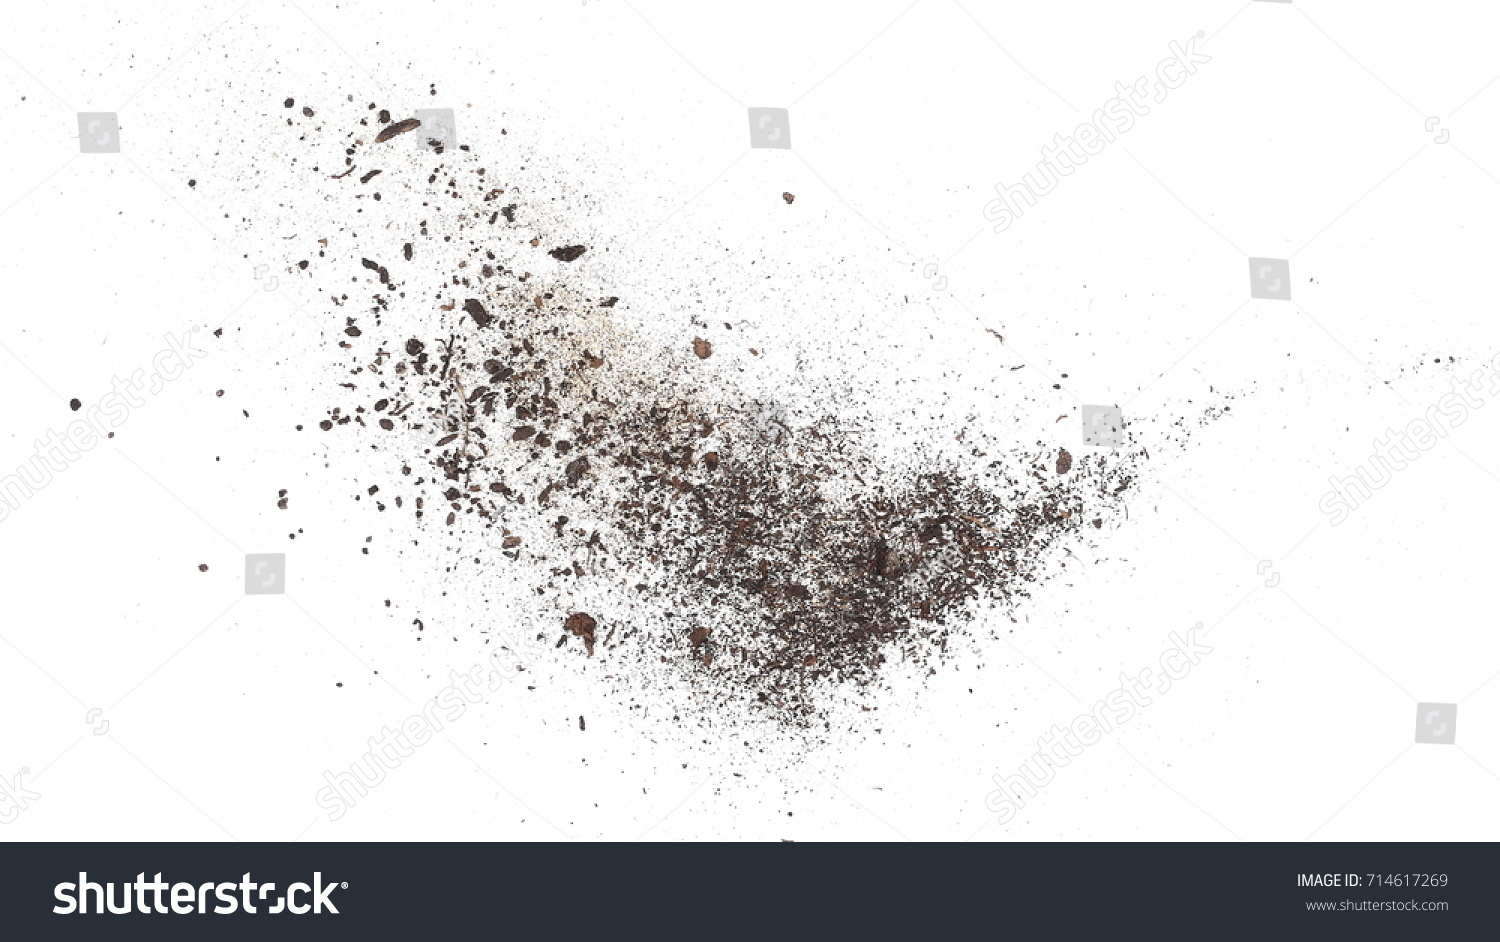 Dust isolated on white background, with clipping path #714617269